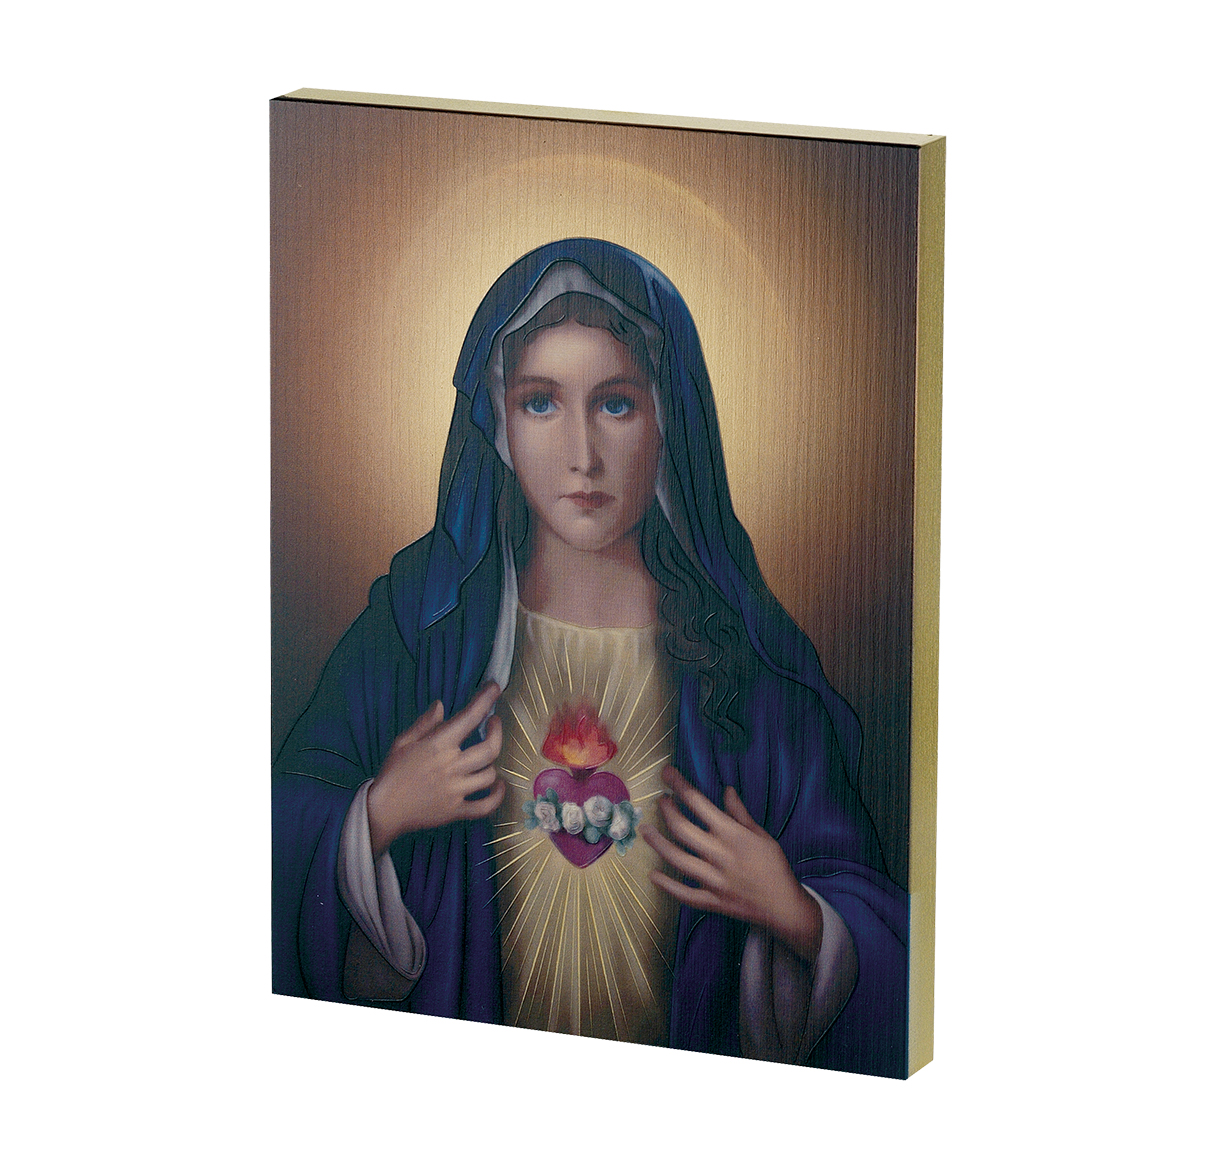 Plaque Immaculate Heart of Mary 8 x 10 inch Textured Wood